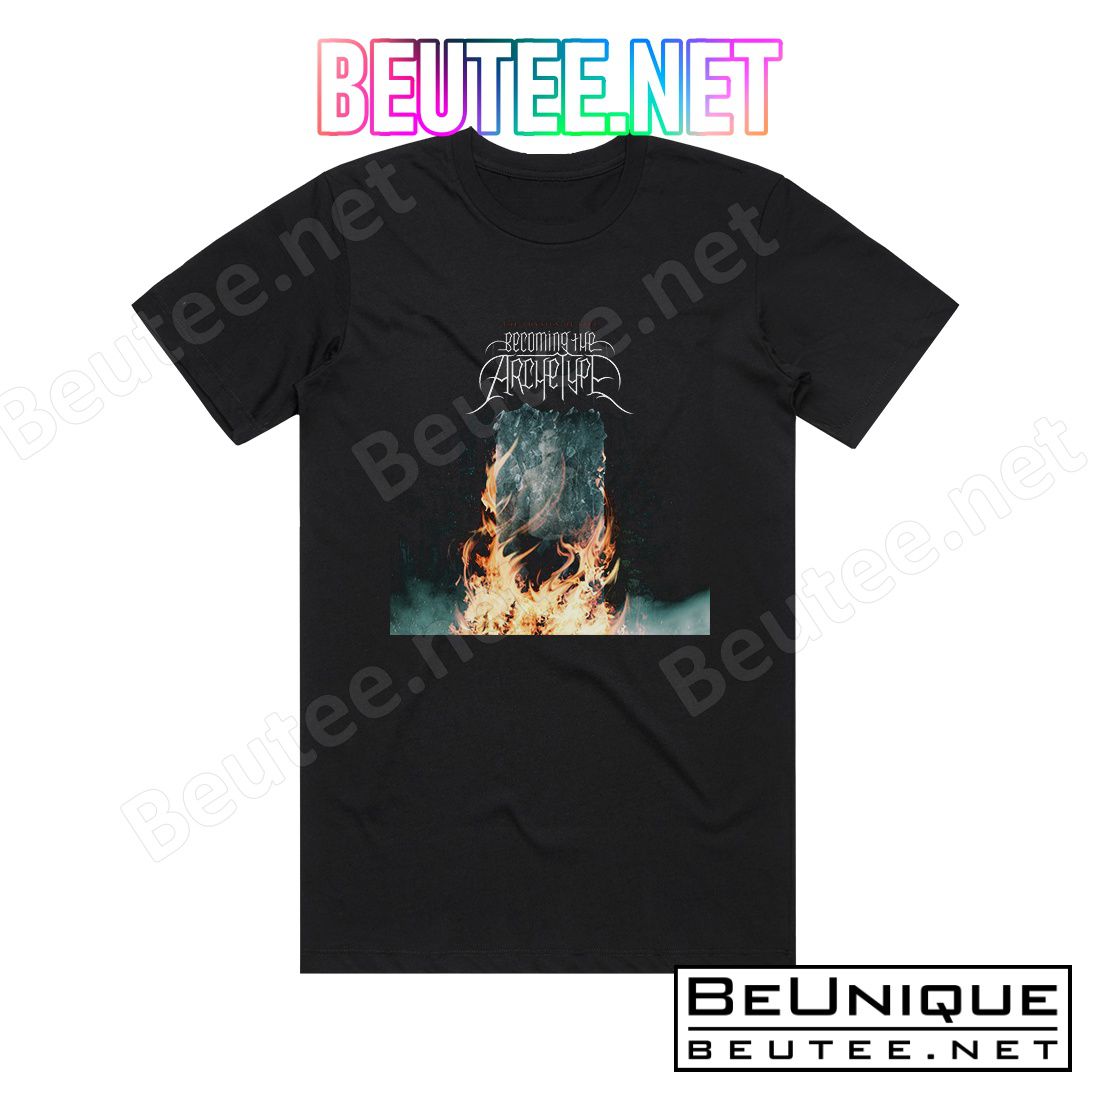 Becoming the Archetype The Physics Of Fire Album Cover T-Shirt